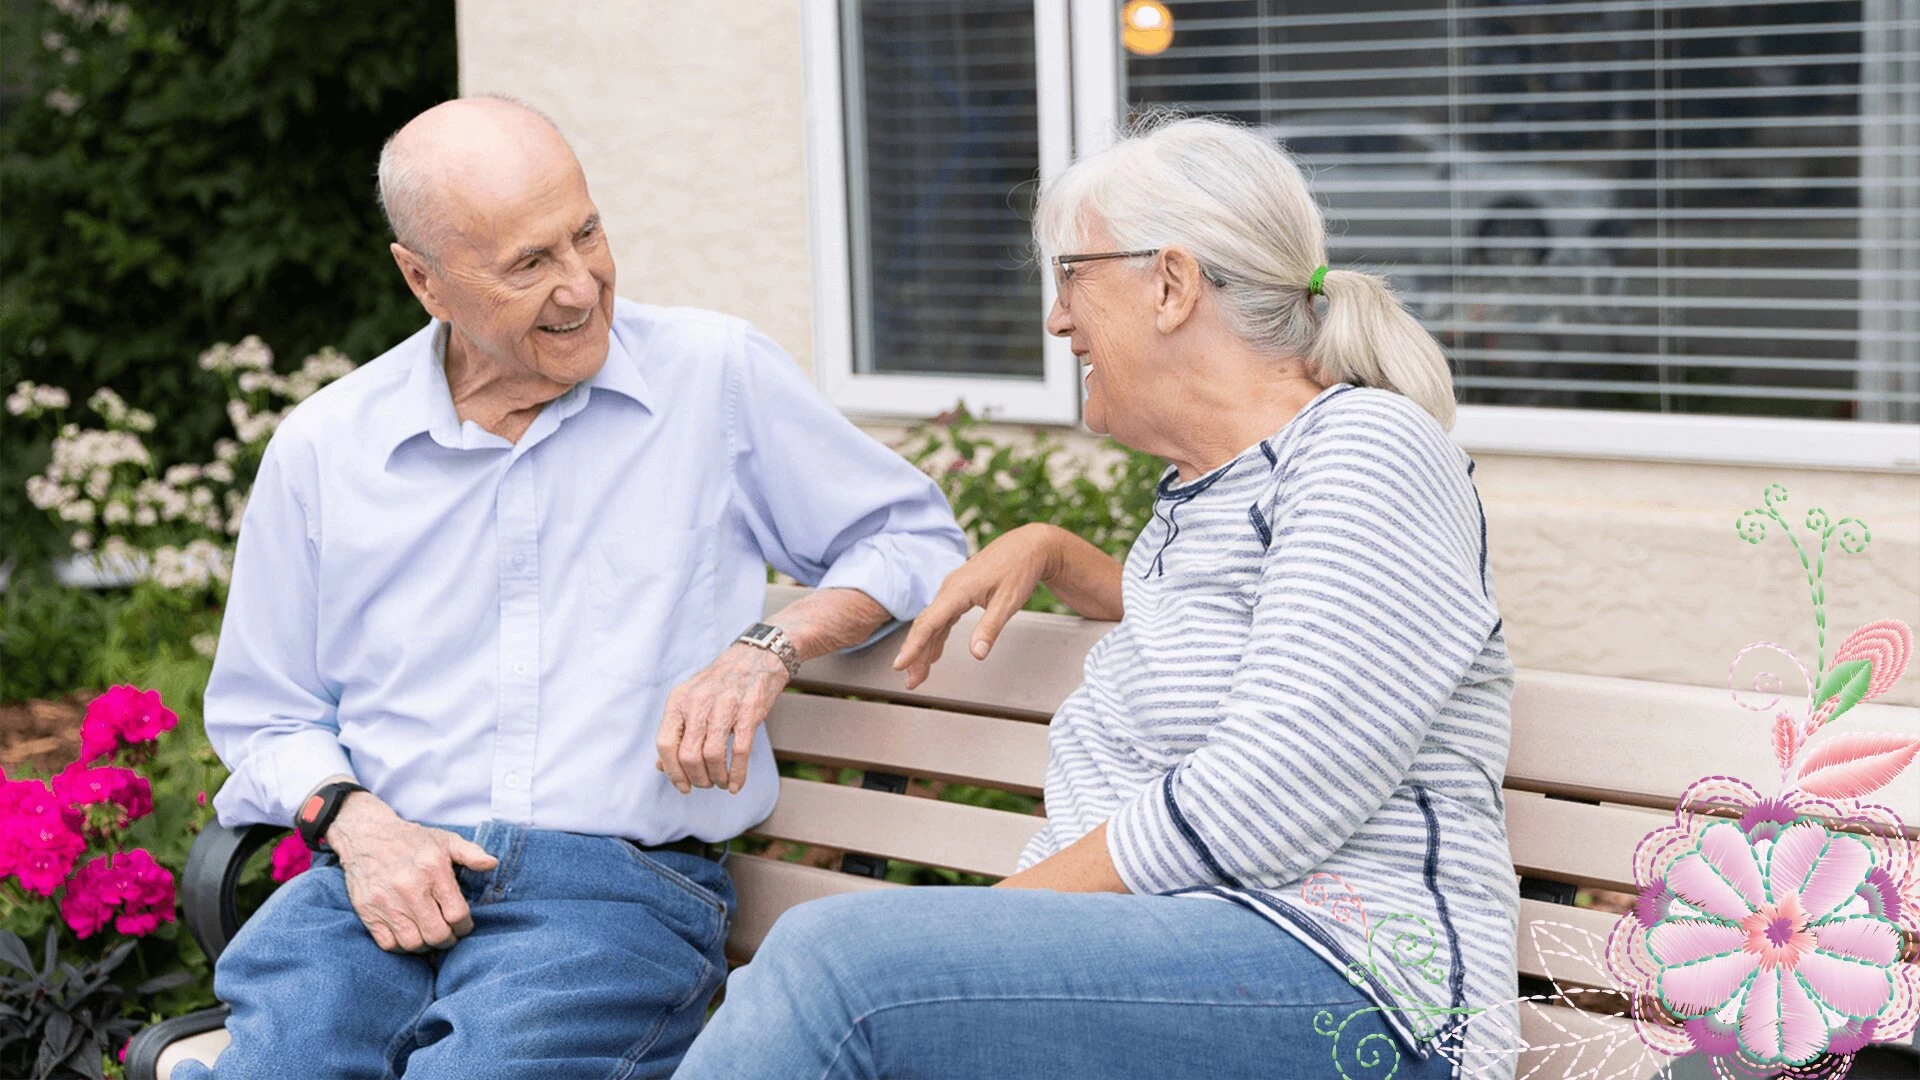 An elderly couple talking and smiling while sitting outside